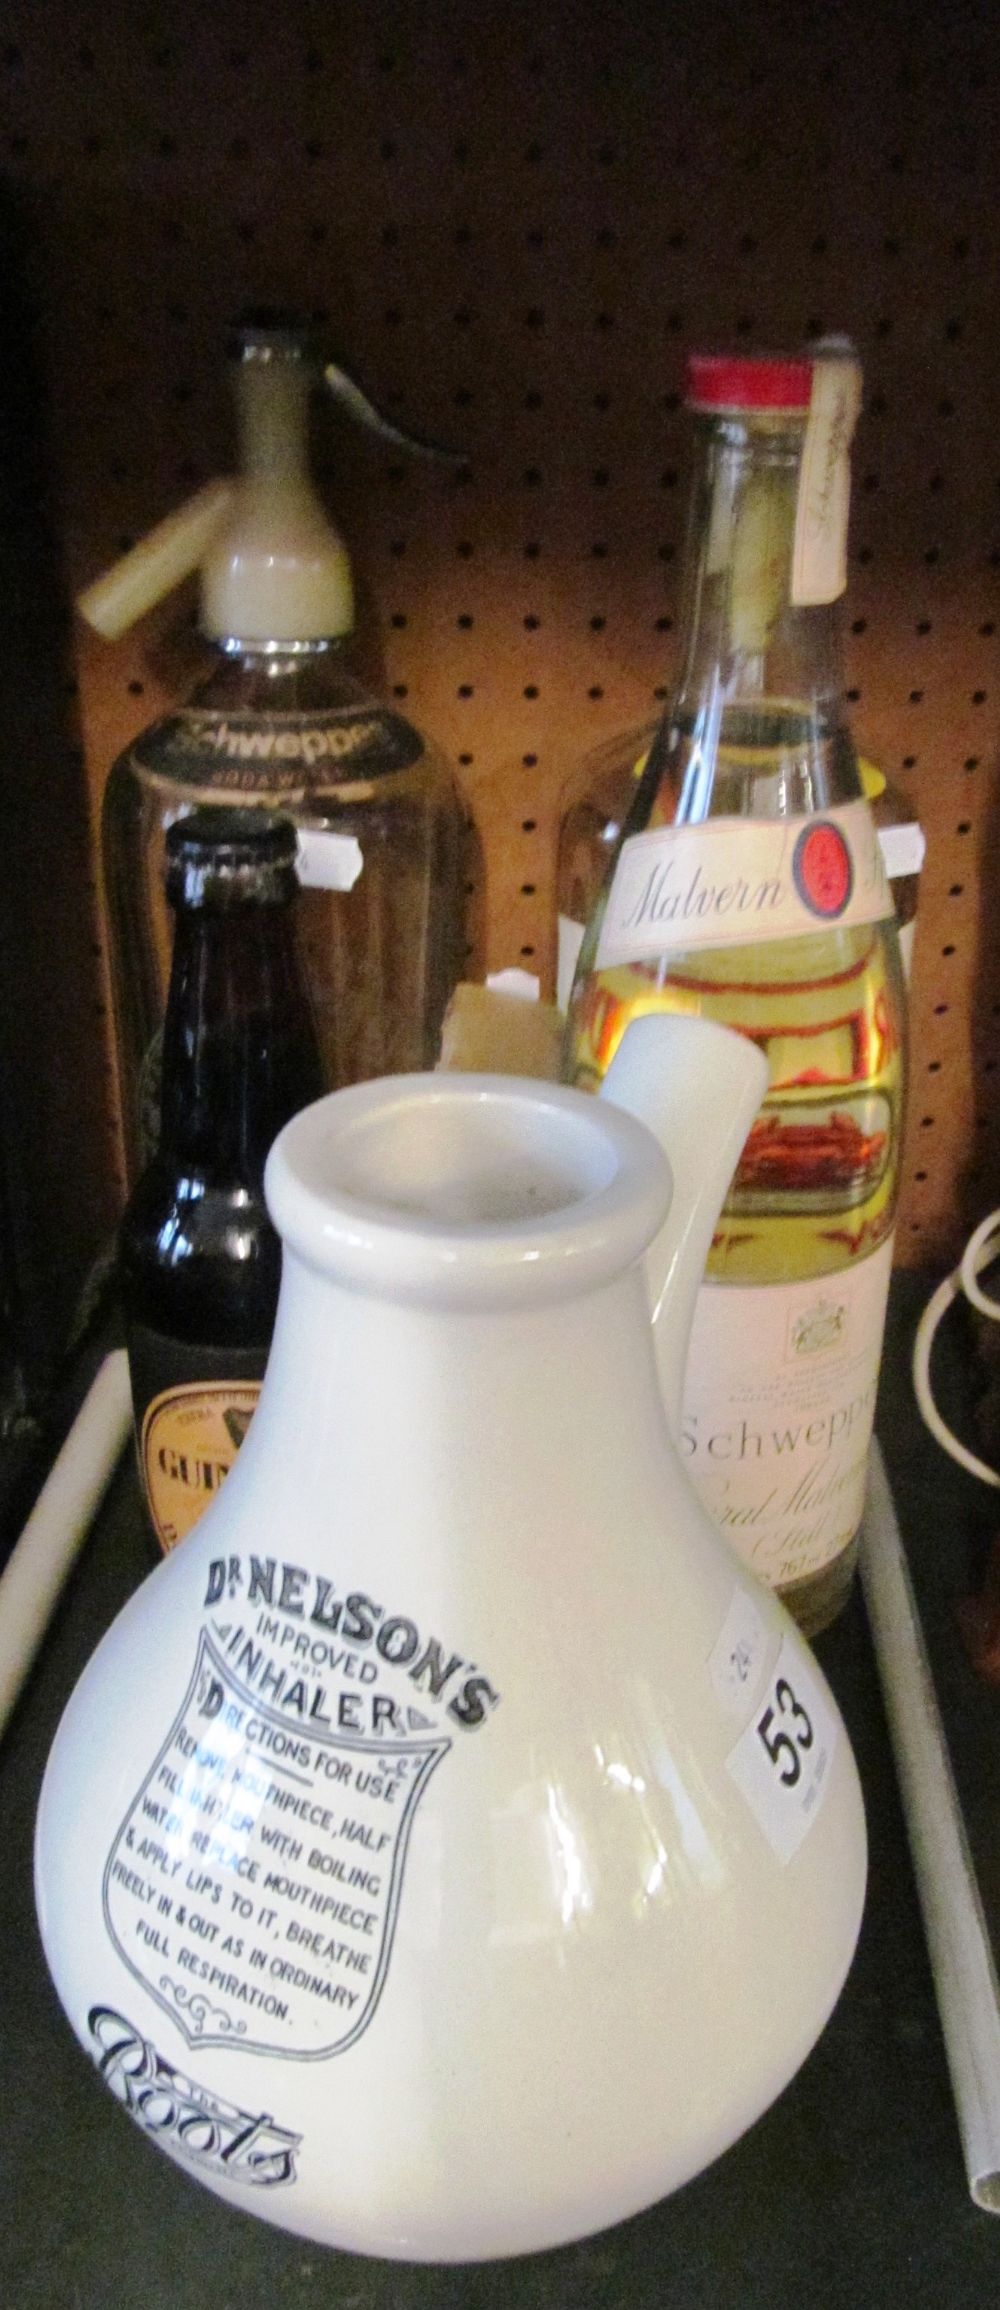 A Schweppes soda syphon and various vintage bottles including Guinness